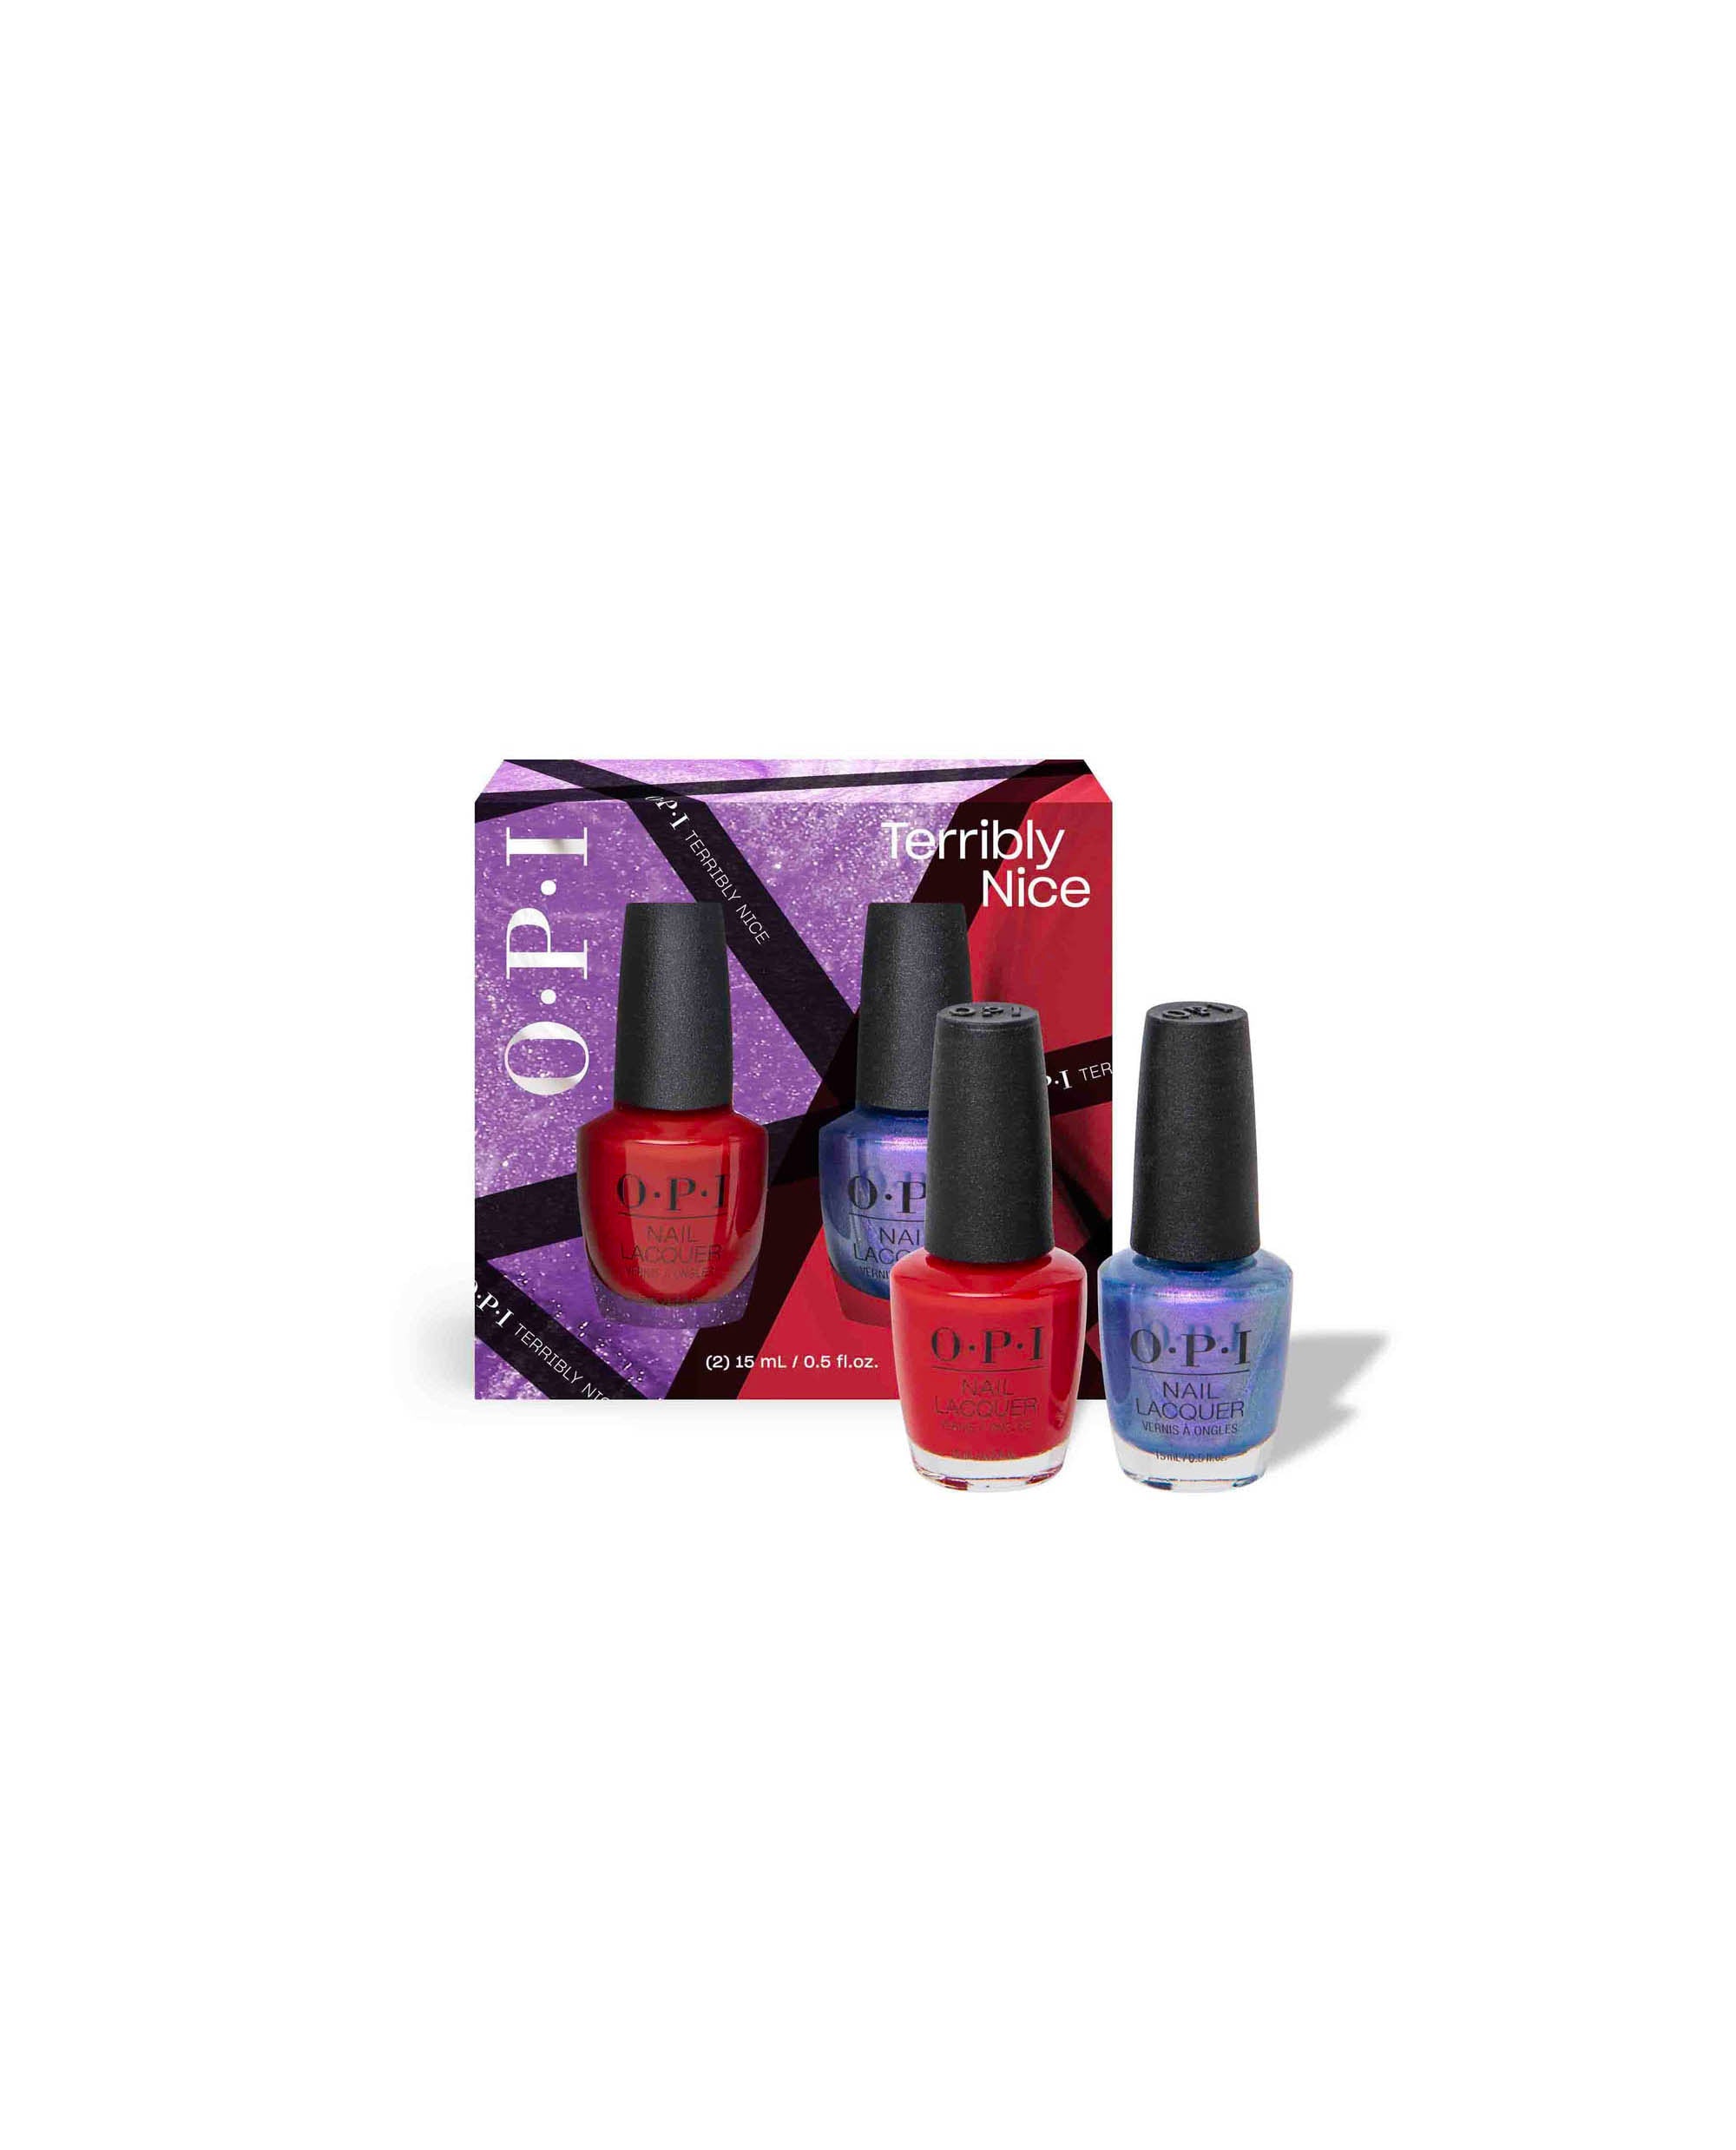 OPI Terribly Nice Nail Lacquer Duo Gift Sets Terribly Nice Collection